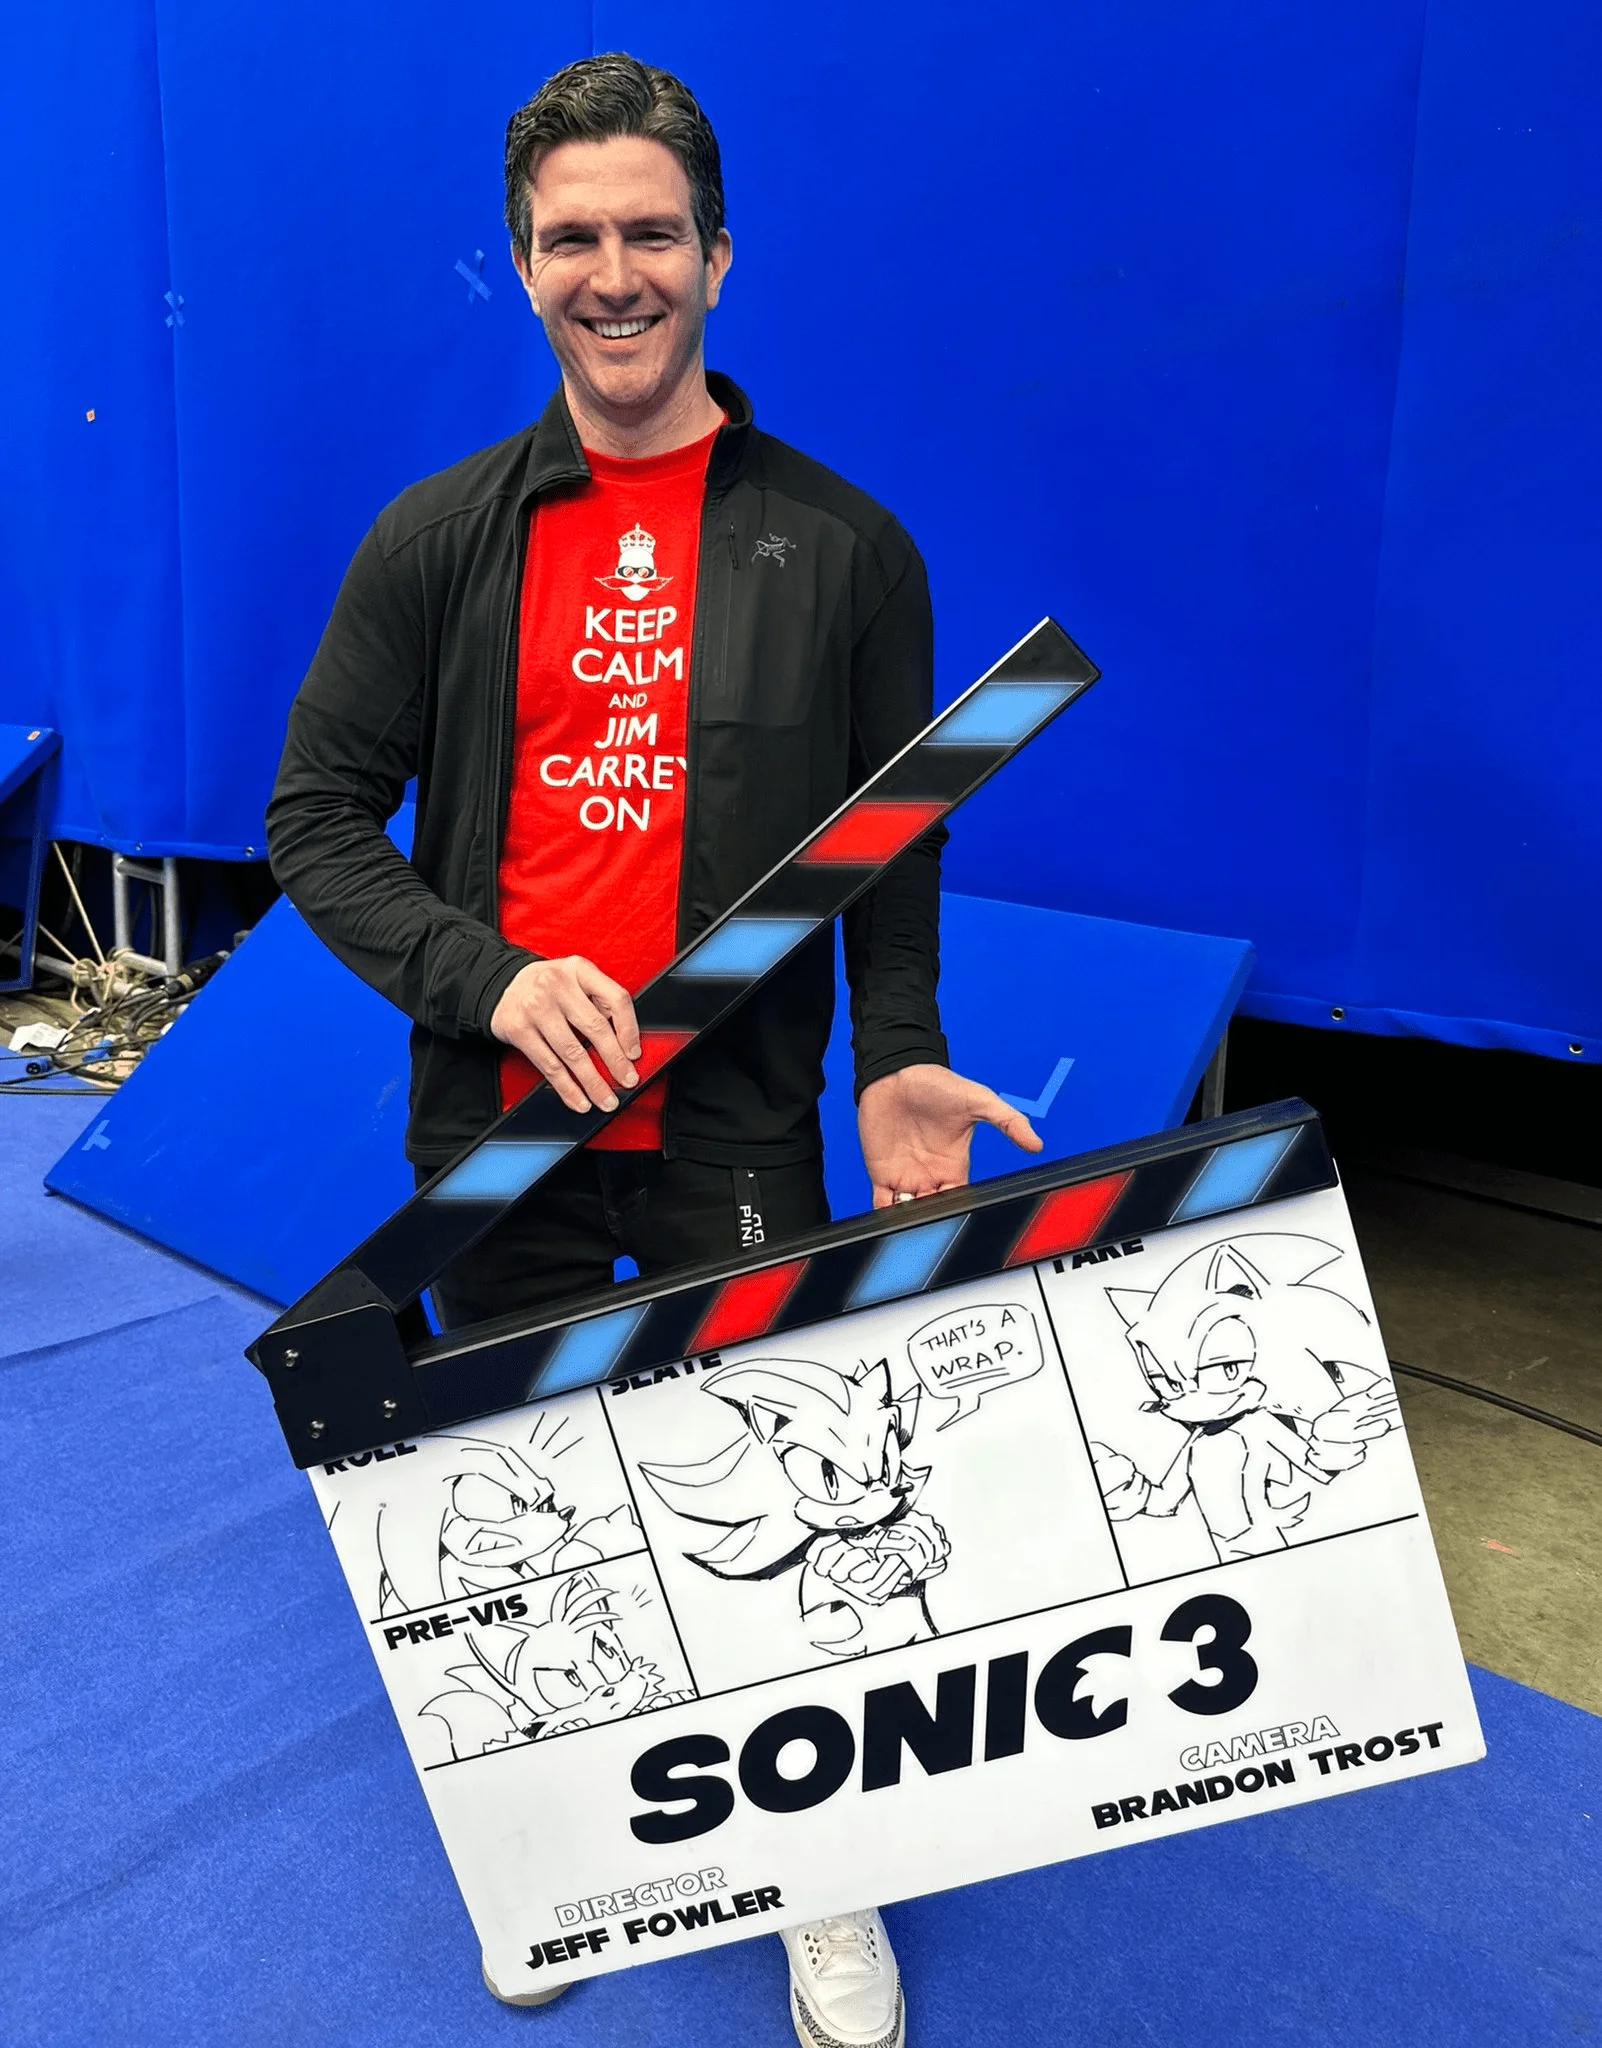 Promptly. Filming of the threequel film adaptation of the Sonic games has come to an end